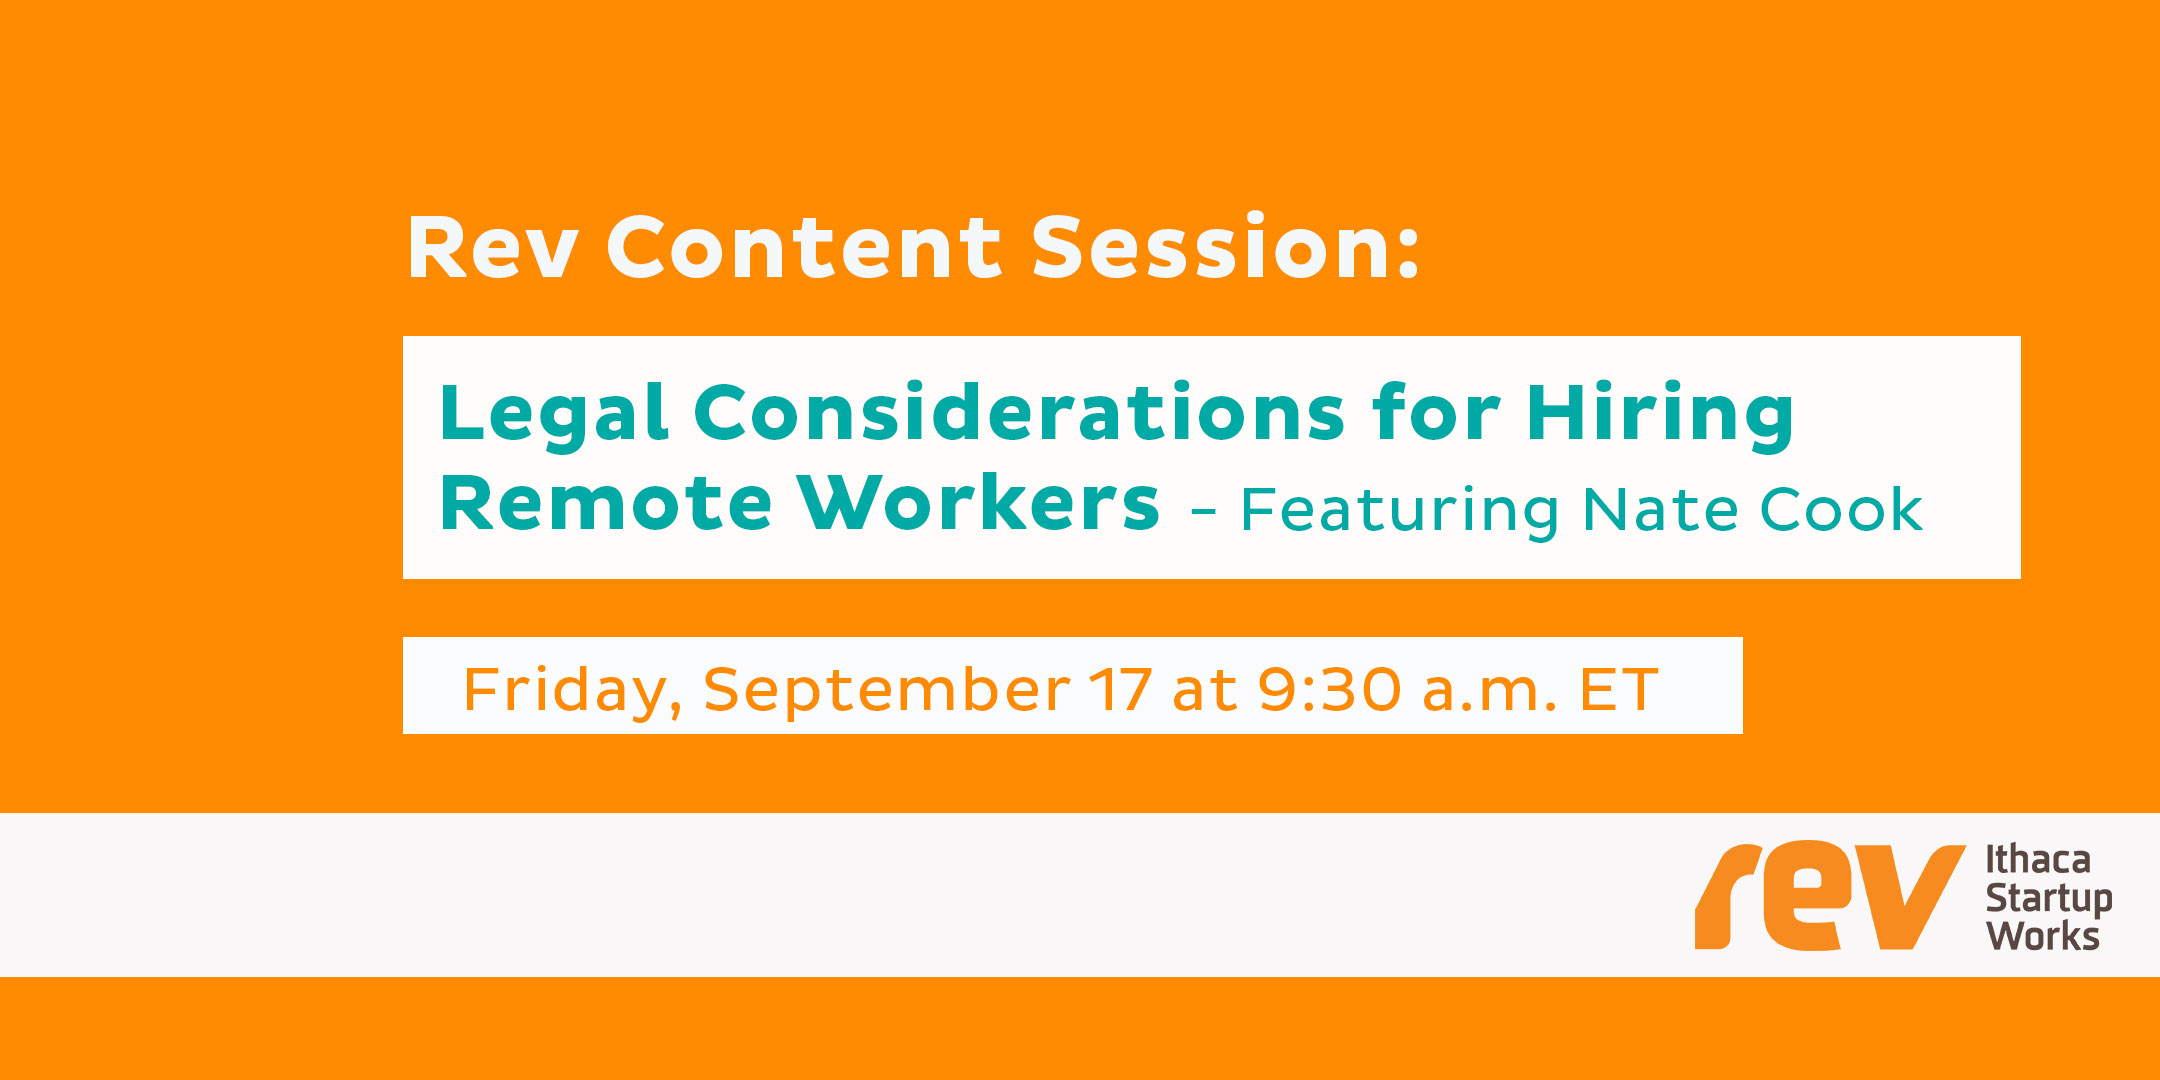 Rev Content Session: Legal Considerations for Hiring Remote Workers with Nate Cook. Friday, September 17 at 9:30 a.m. ET.